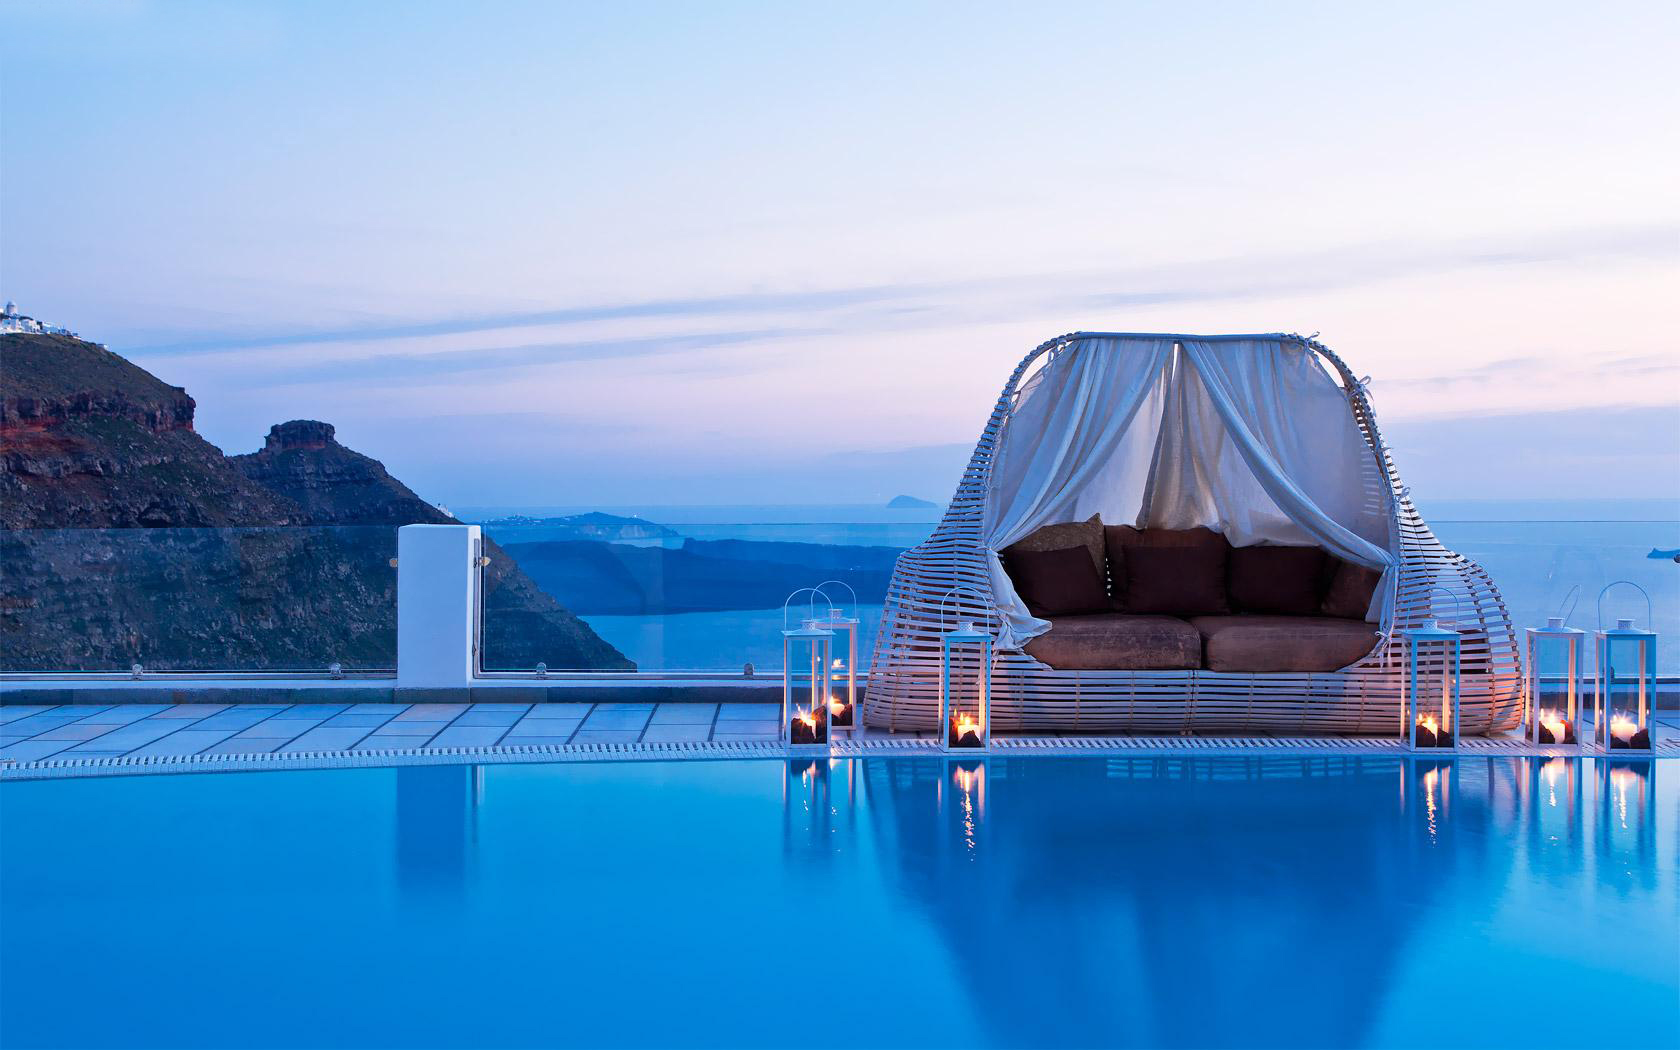 14, 2015 By Admin Comments Off On 15 Most Beautiful - Santorini Princess Spa Hotel - HD Wallpaper 